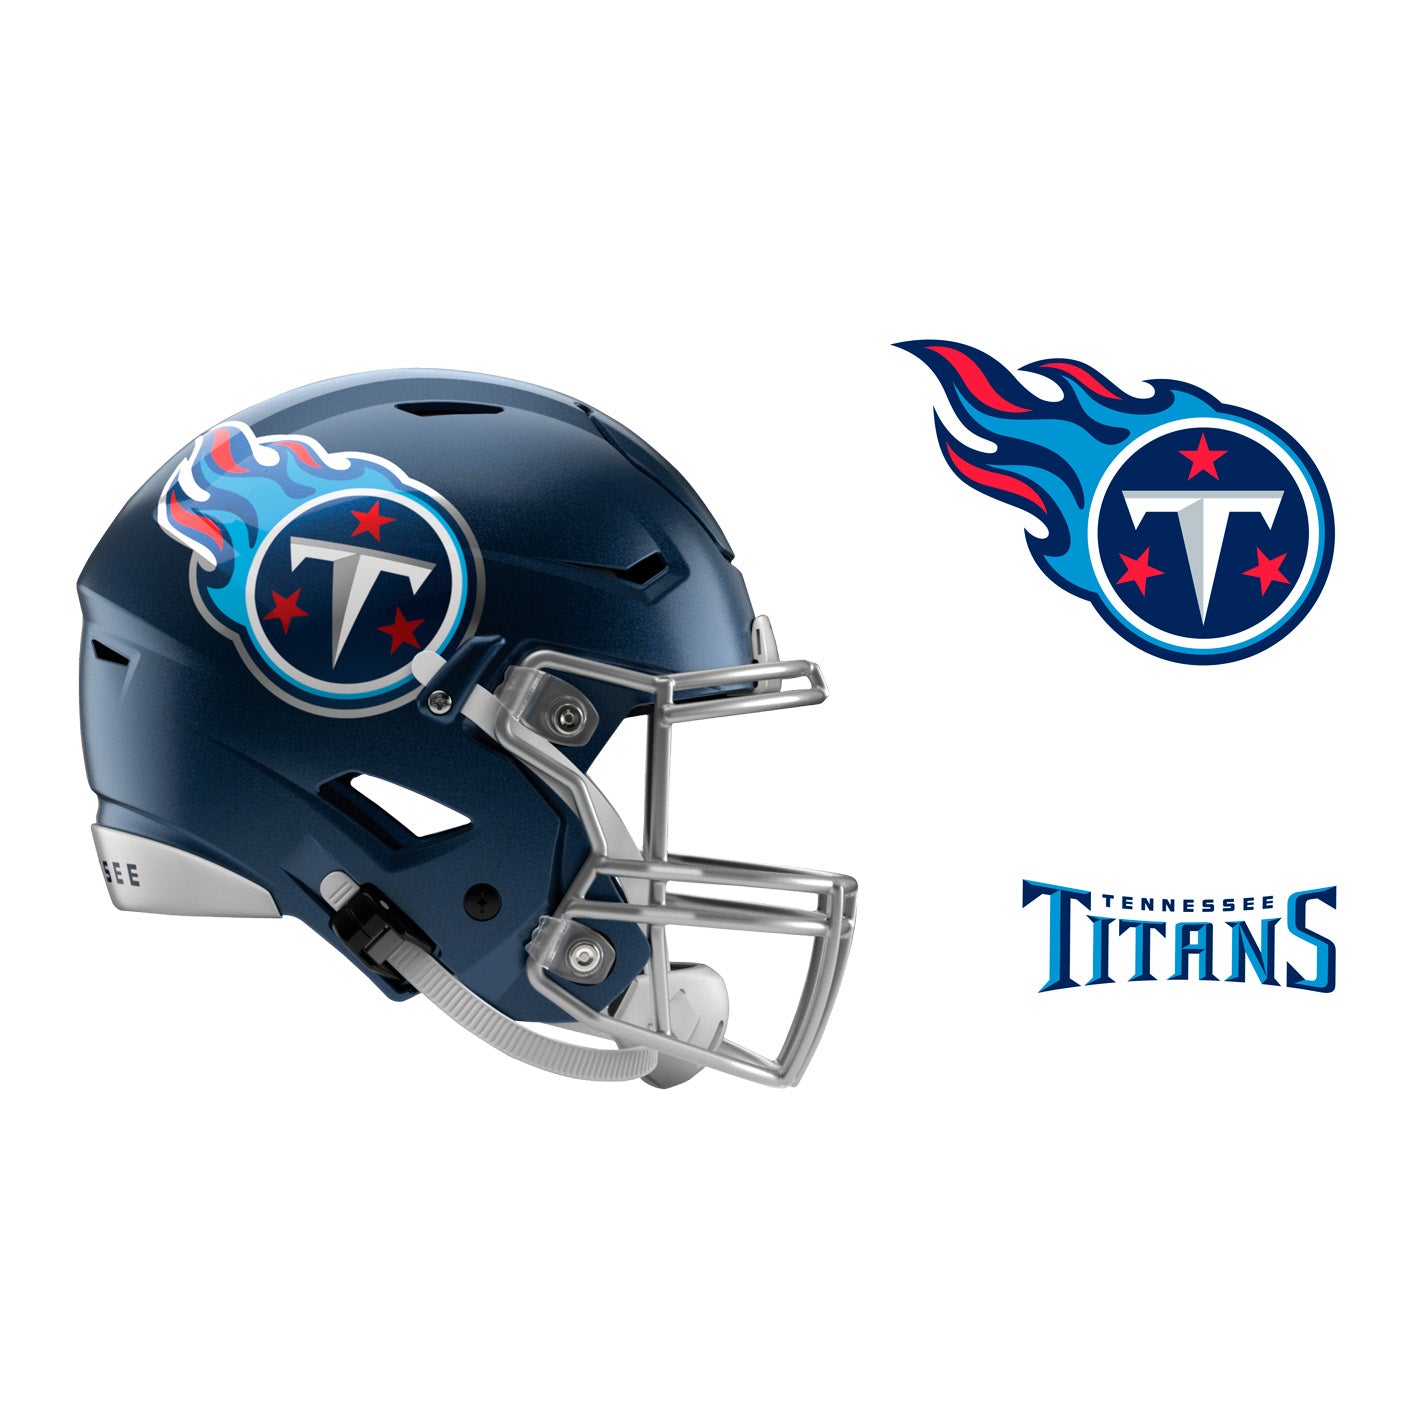 Tennessee Titans: 2022 Helmet - Officially Licensed NFL Removable Adhe